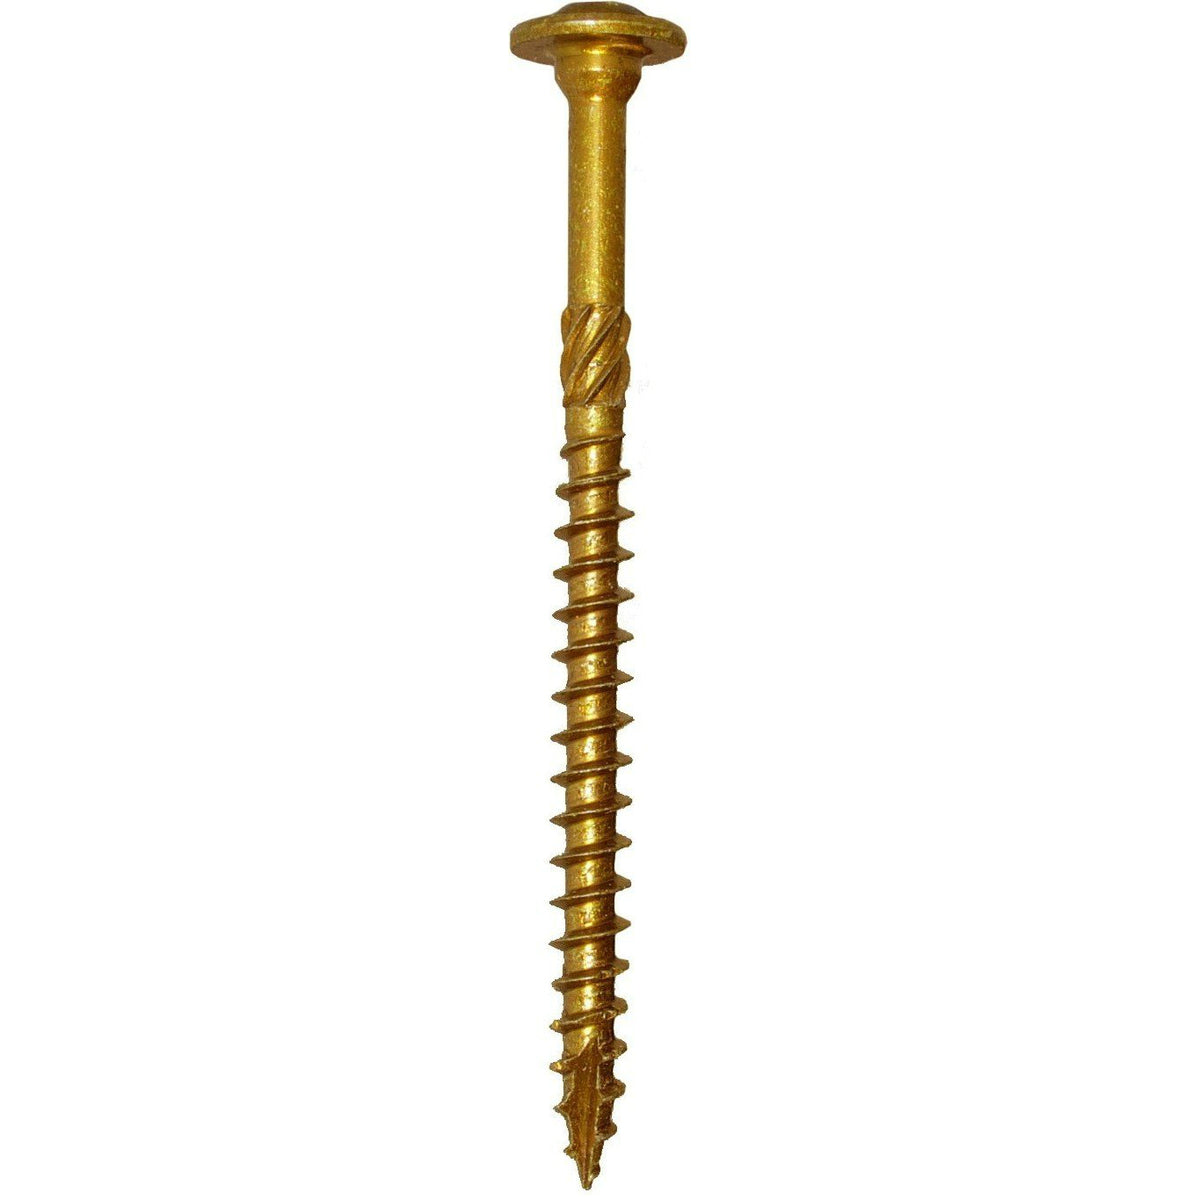 GRK 11137 RSS UberGrade Rugged Structural Screw, 10 x 3-1/8", 236-Count